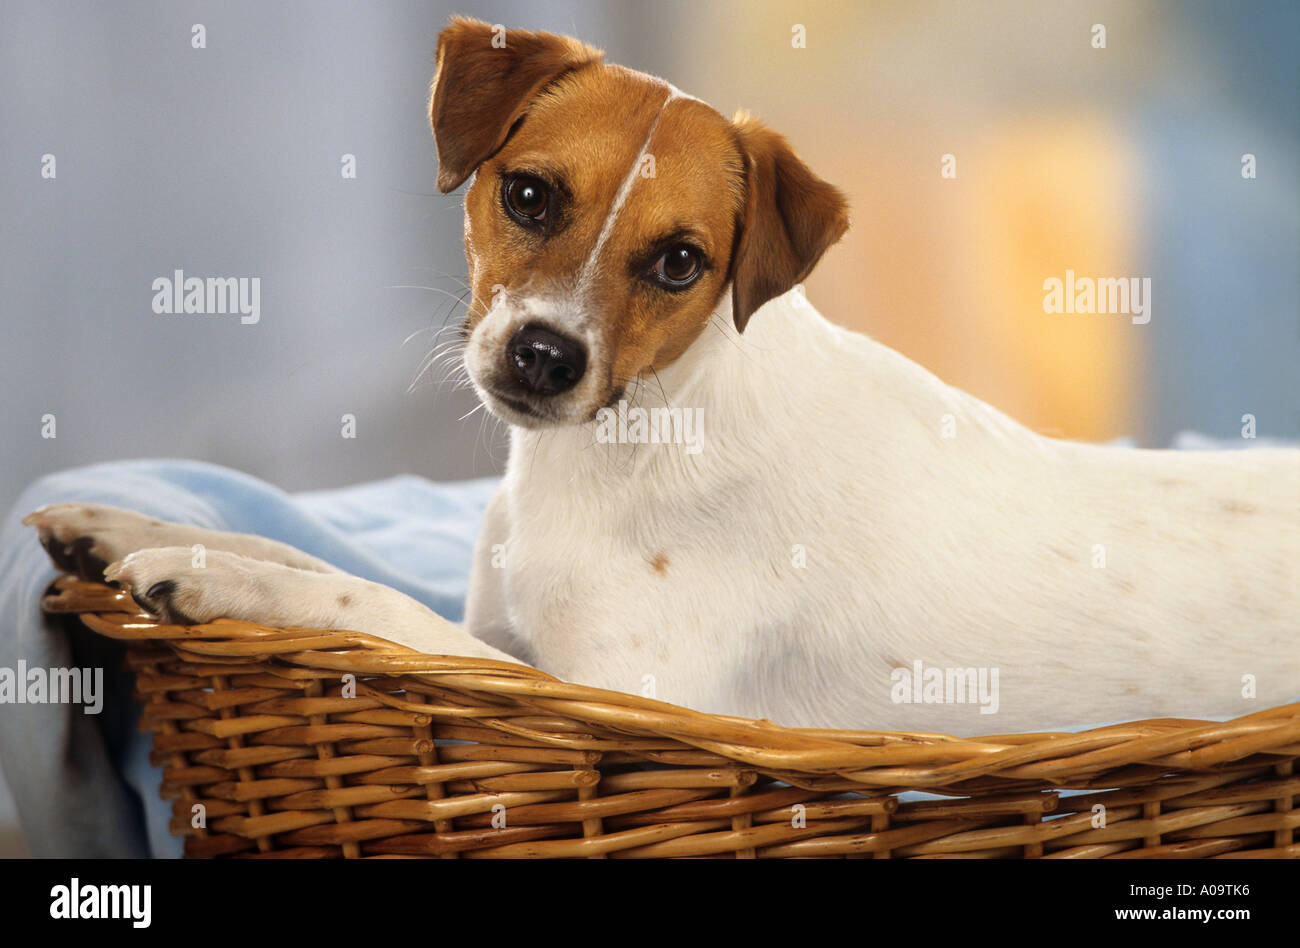 Parson Jack Russell Terrier lying in basket Banque D'Images